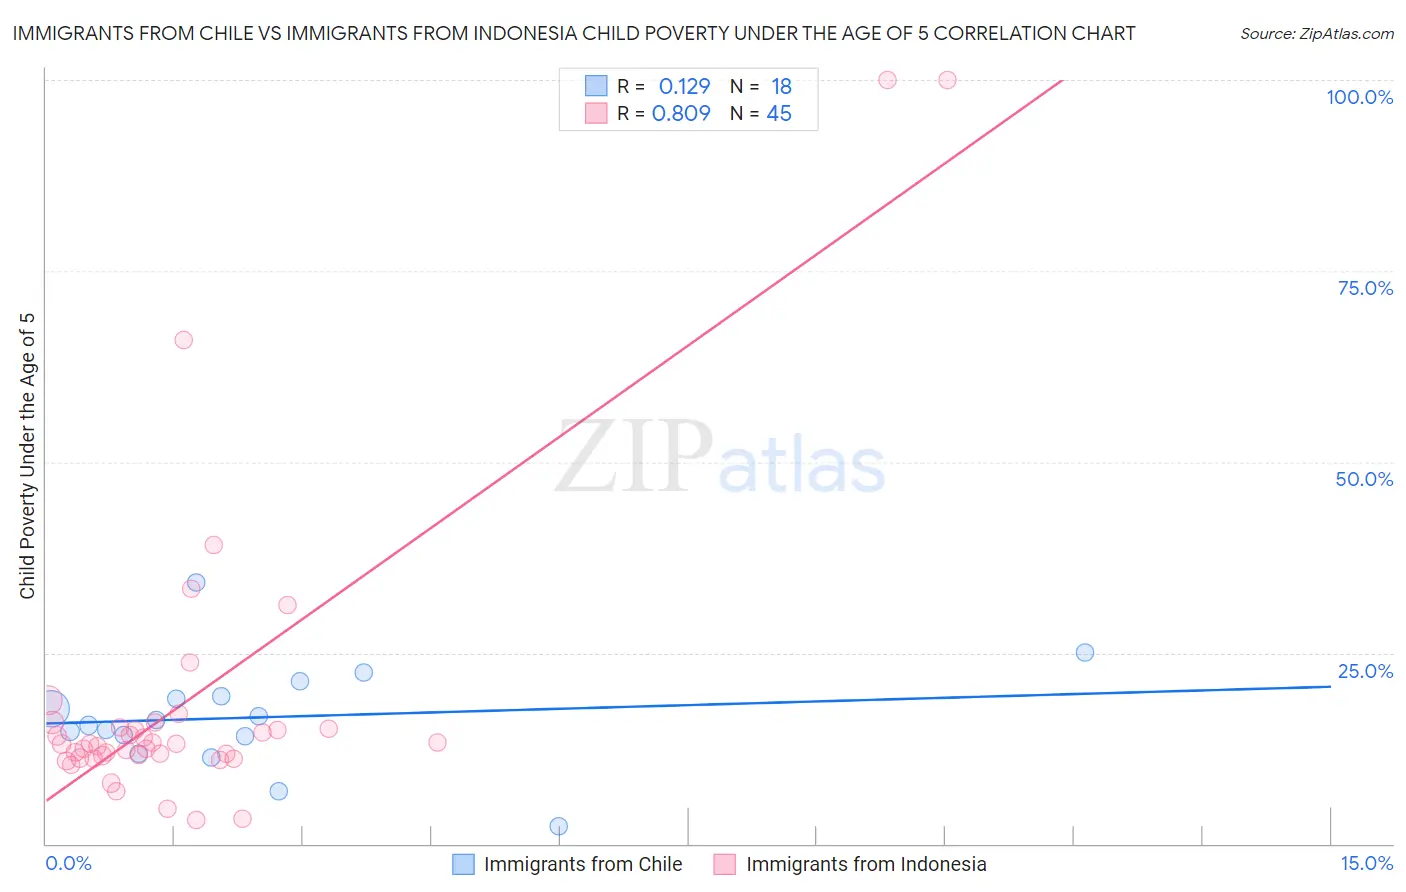 Immigrants from Chile vs Immigrants from Indonesia Child Poverty Under the Age of 5